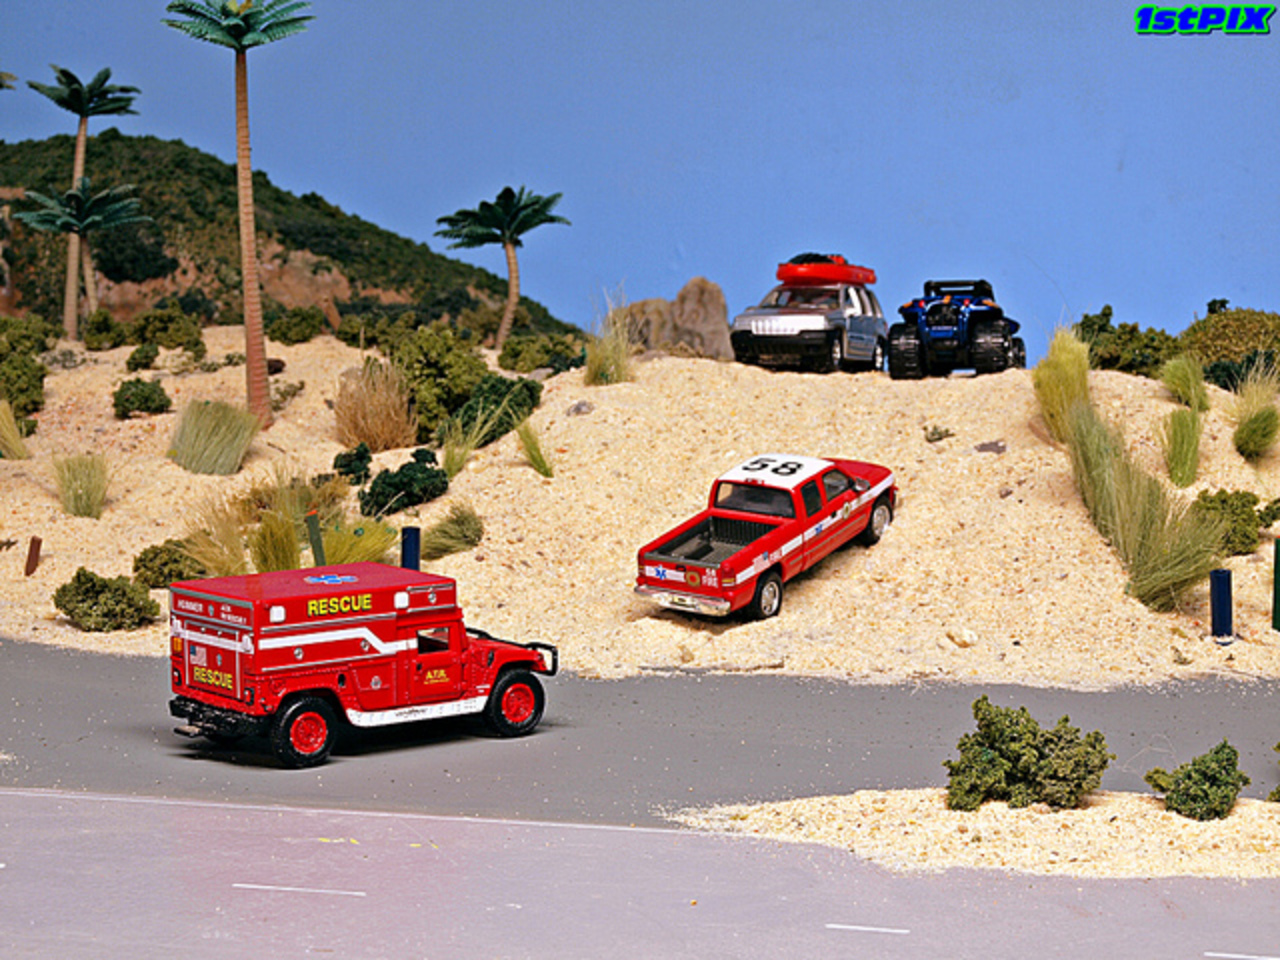 FDMB Critical Incident Response Diorama | Flickr - Photo Sharing!